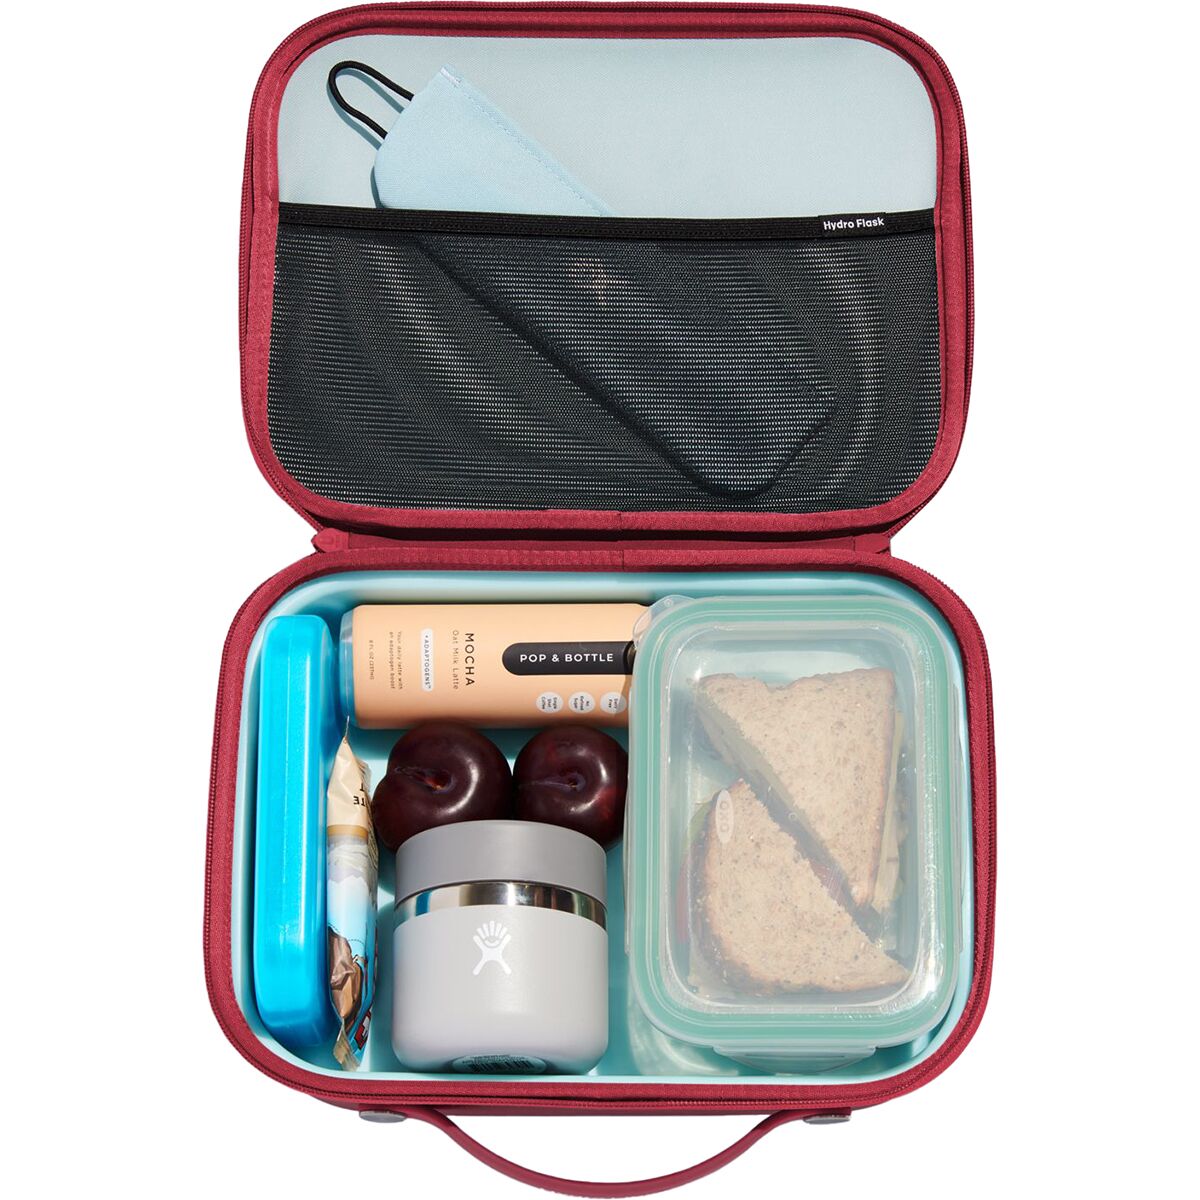 Insulated Lunch Box Large by Hydro Flask - Easton Outdoor Company